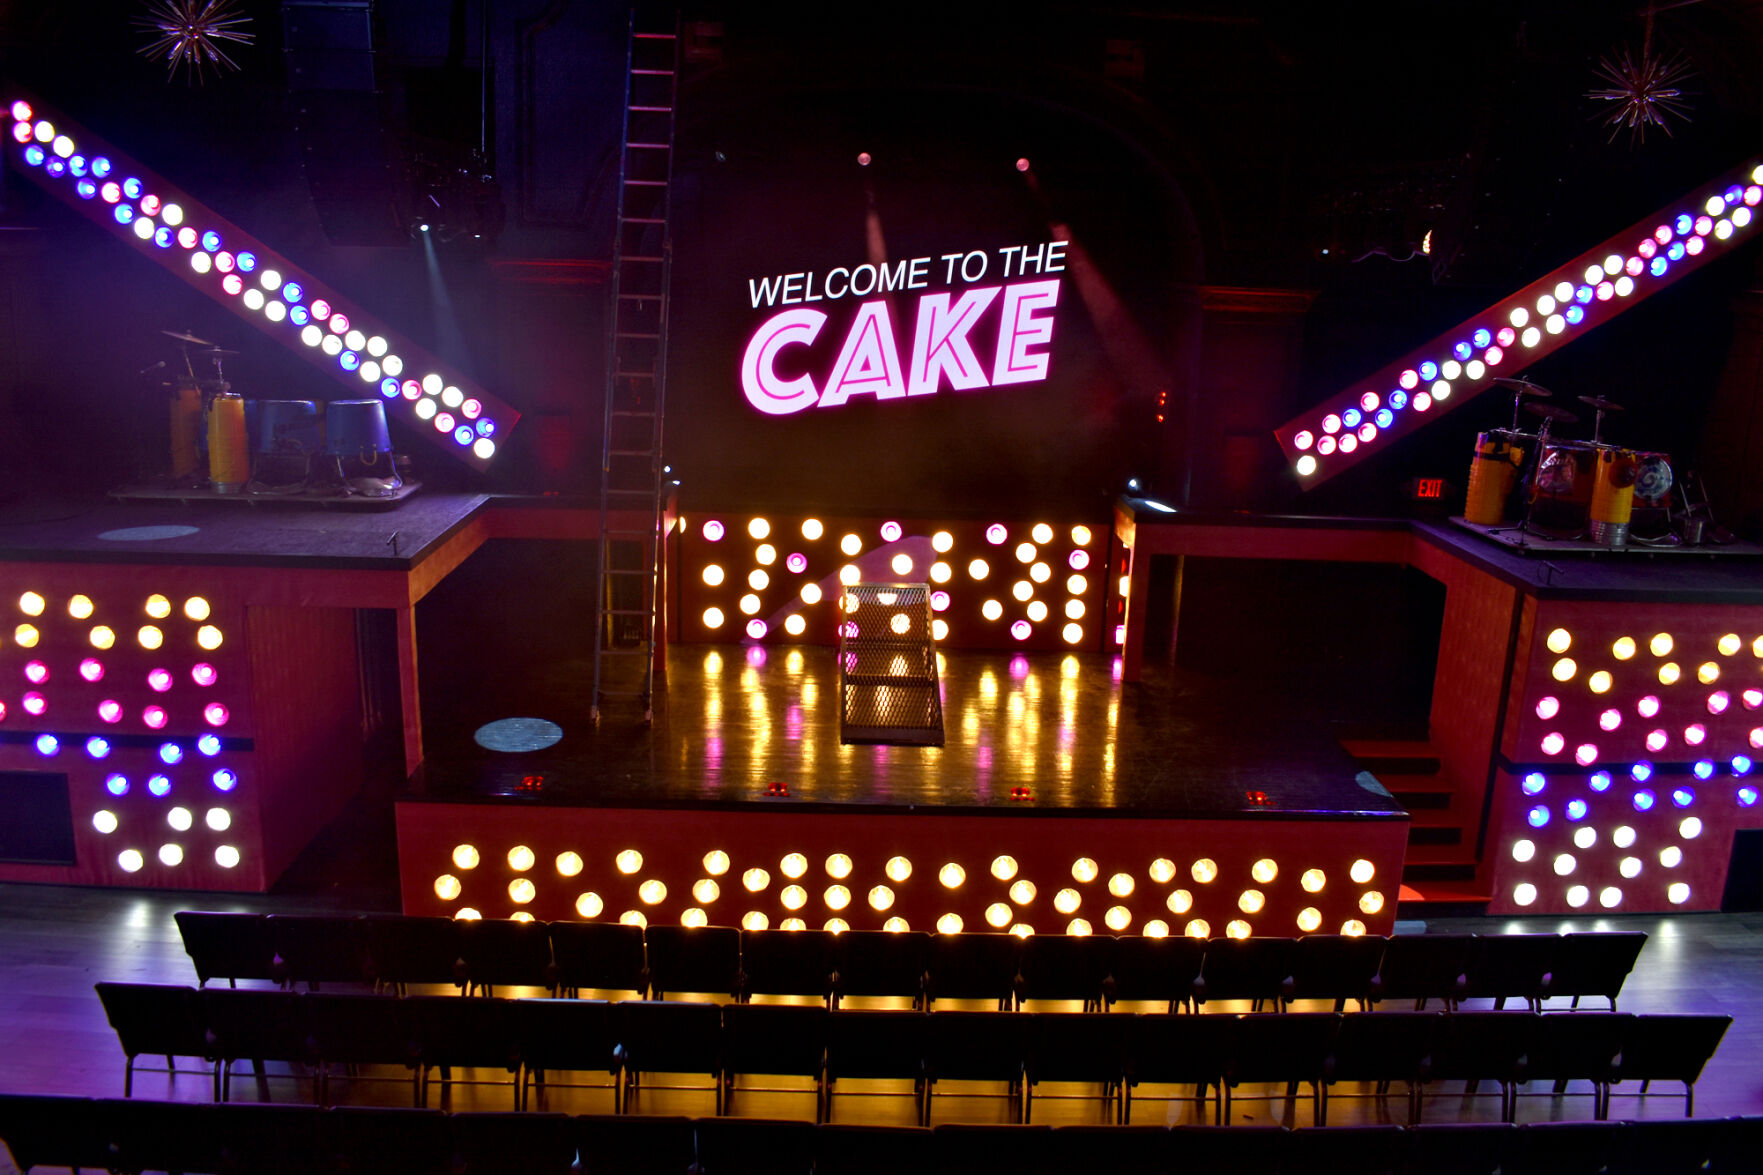 The Cake' at Prologue Theatre comes with baked-in clichés - DC Theater Arts